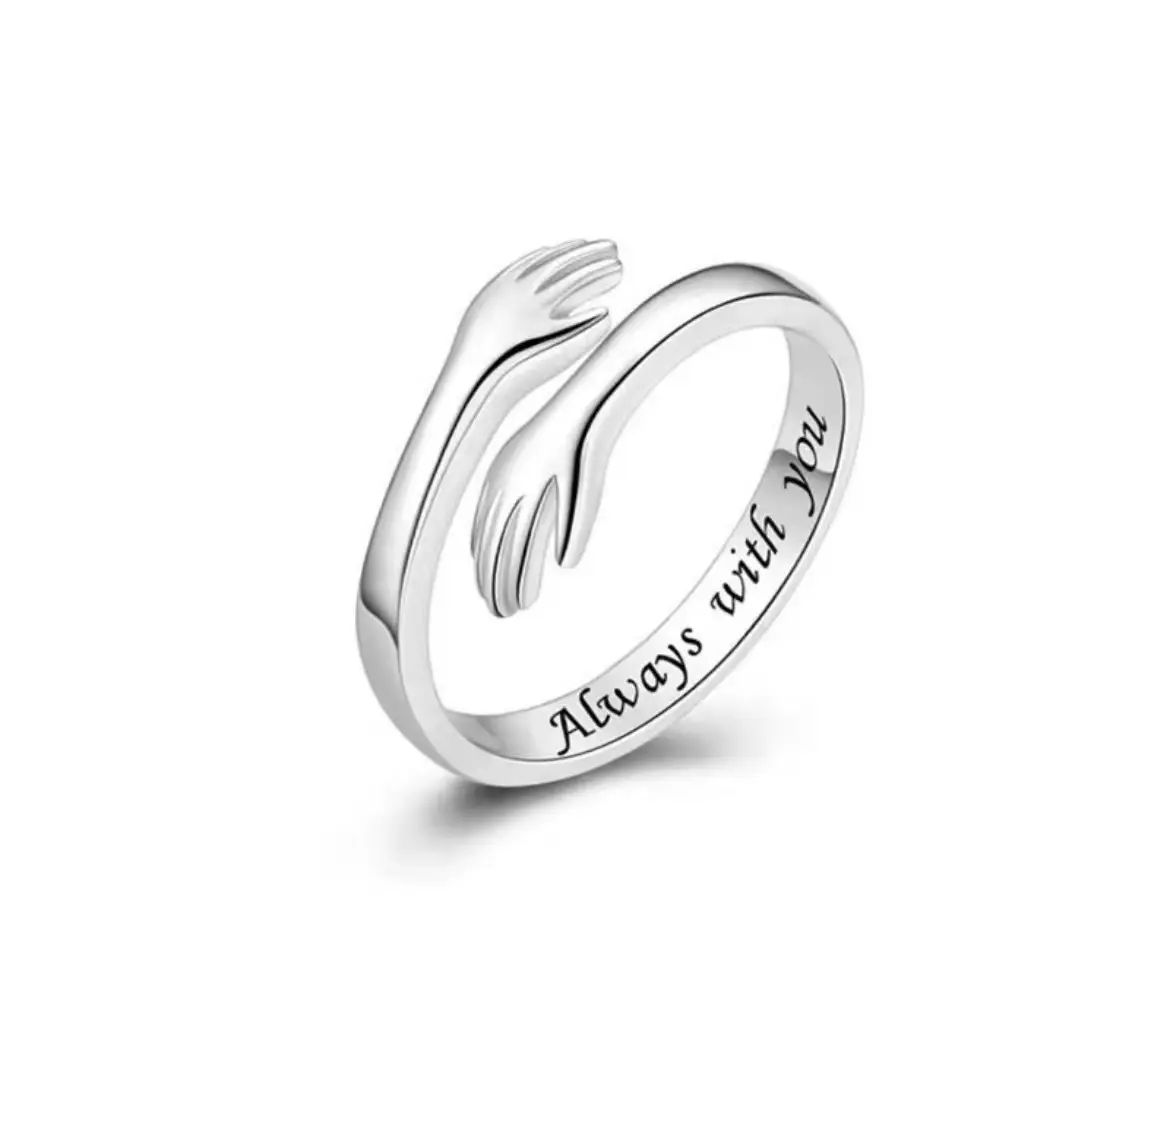 Hot Sale 925 Sterling Silver Hand Hugging Adjustable Open Ring For Couples Valentine's Day Gift Engraved Letters Love Hug Ring